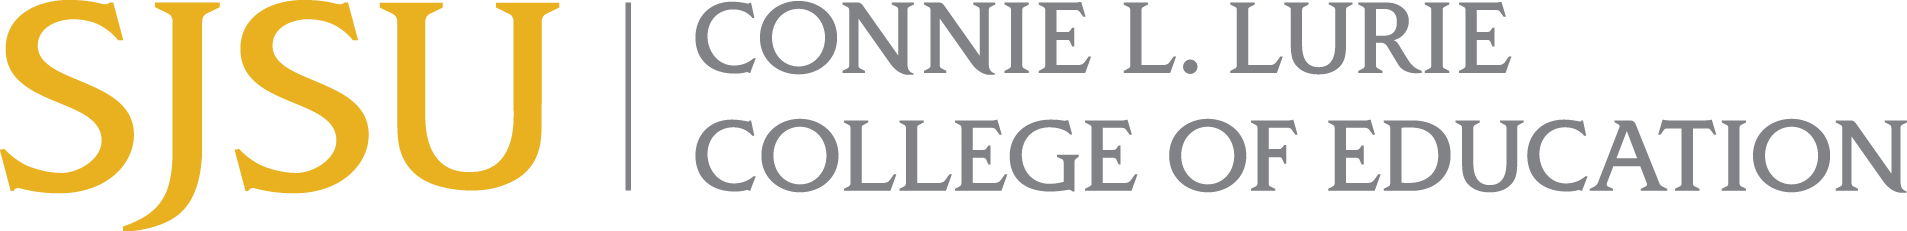 Connie L. Lurie College of Education